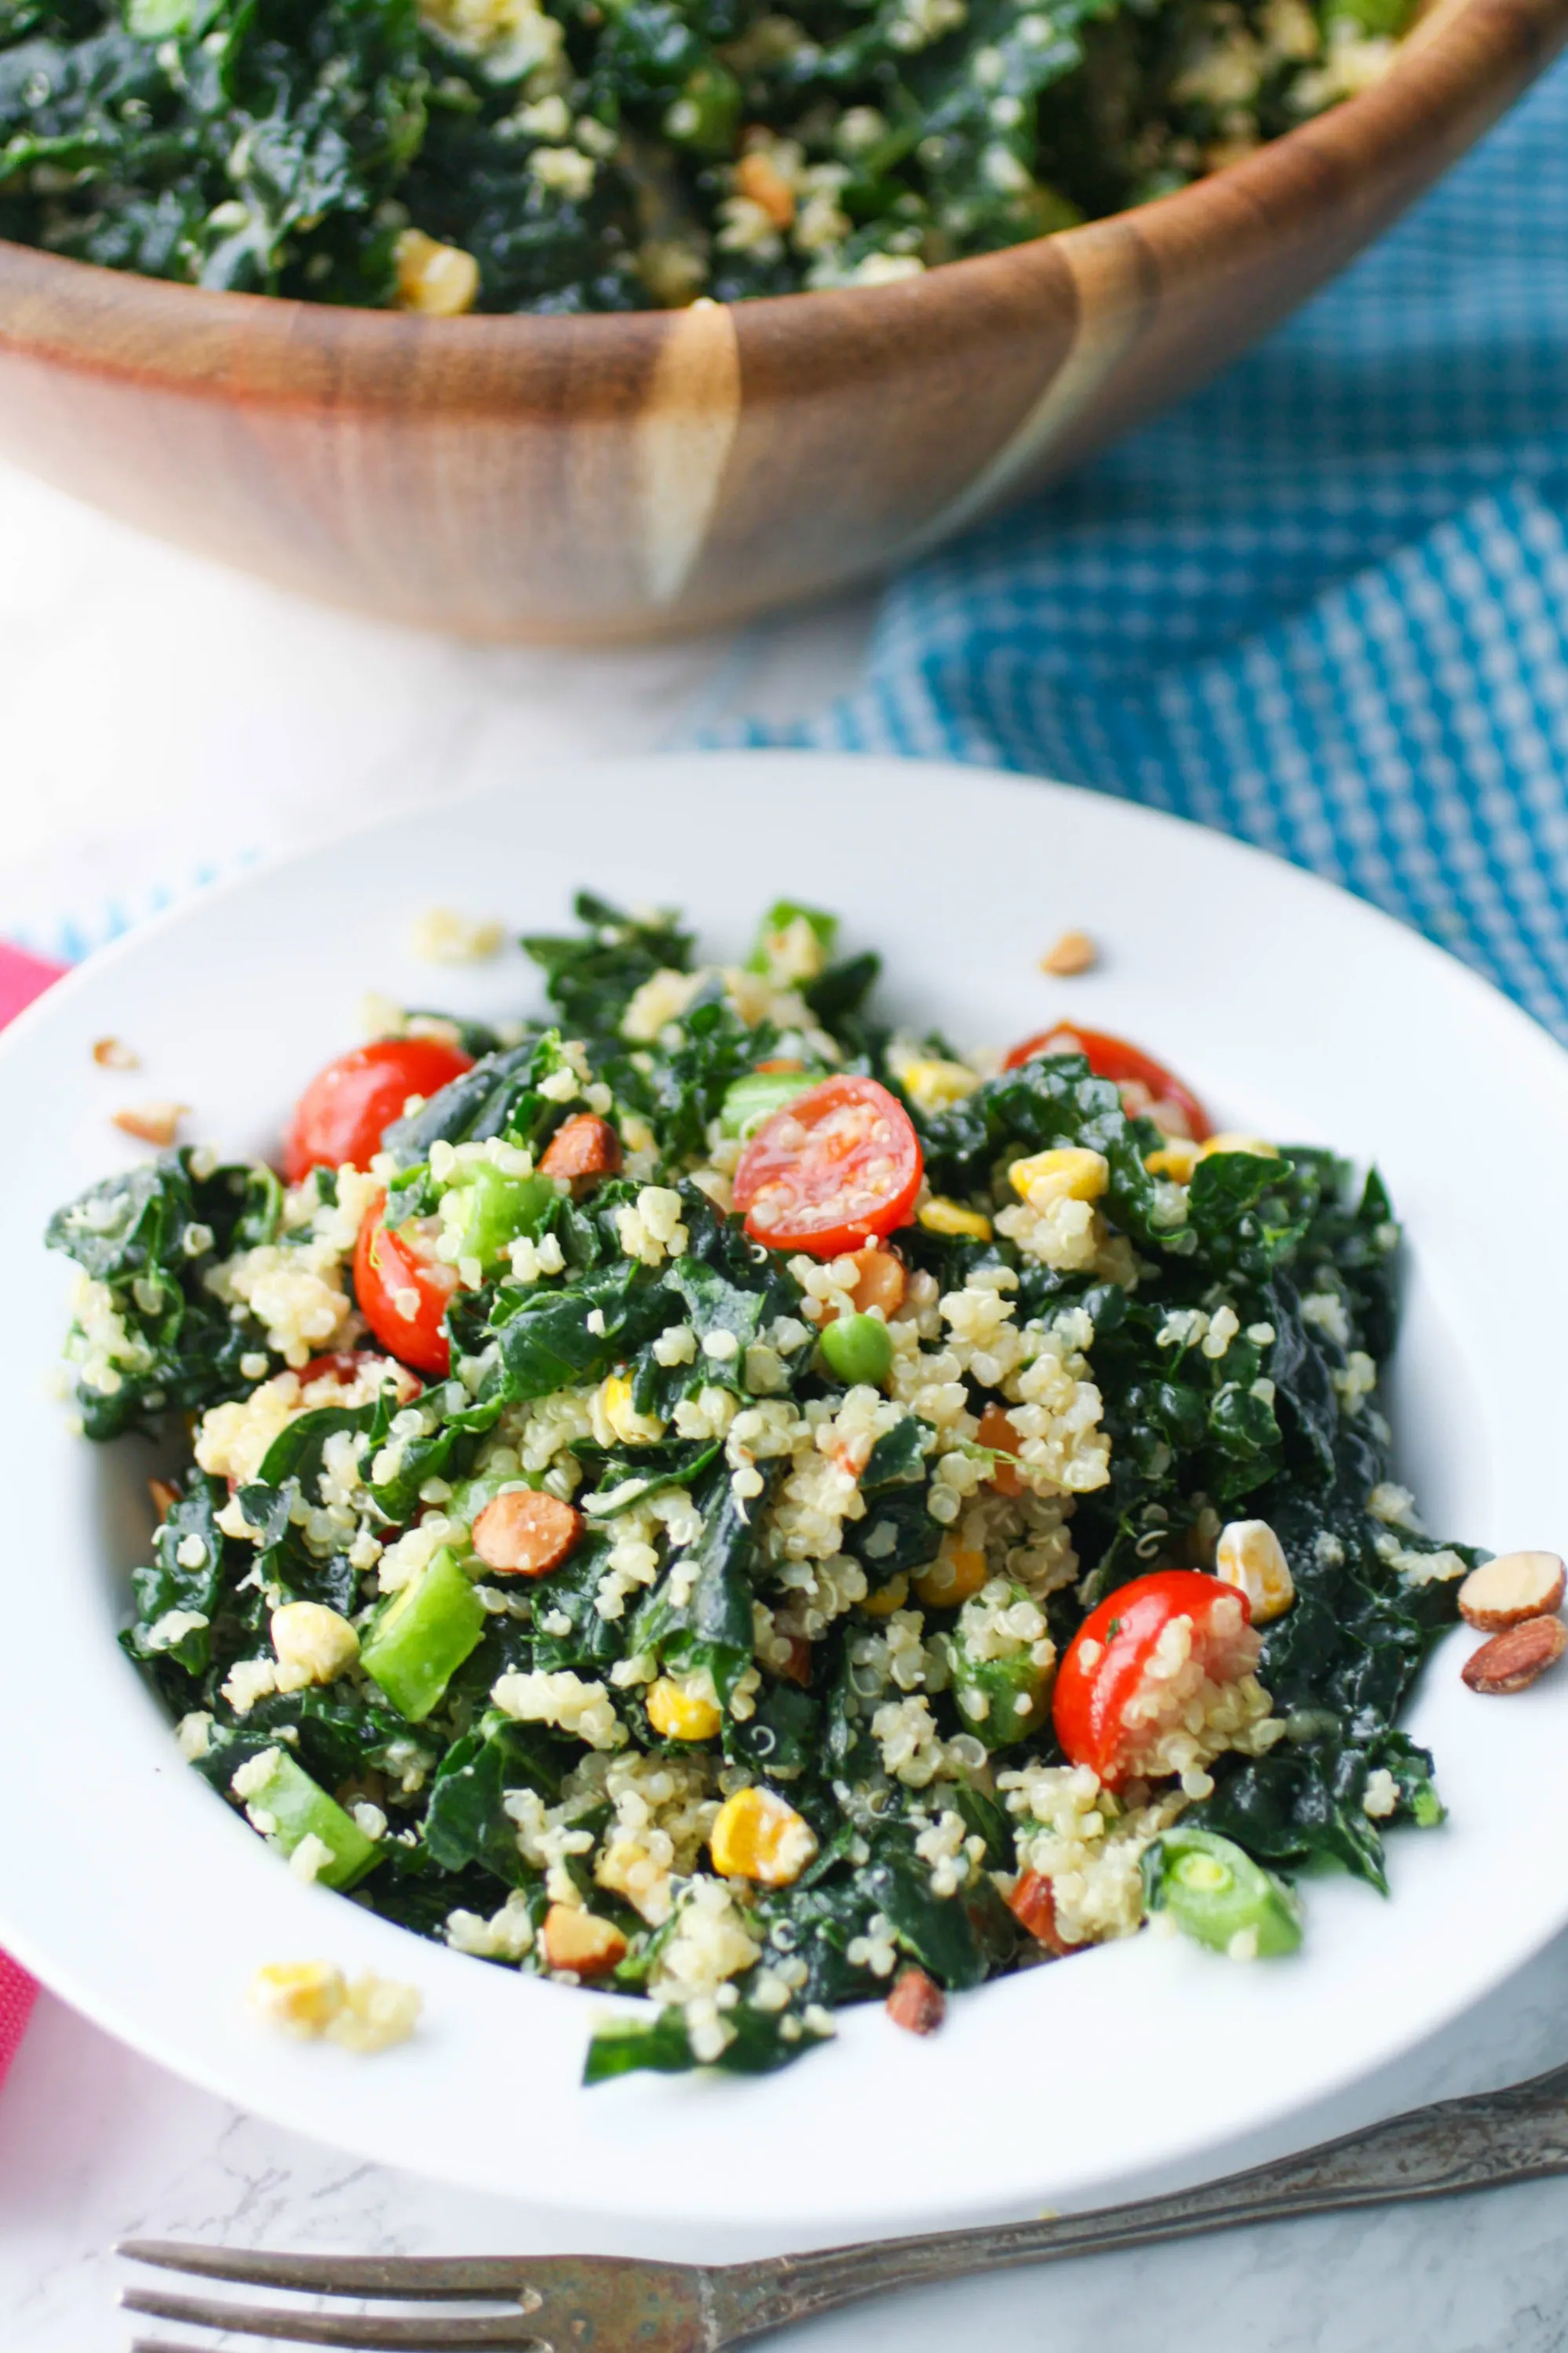 Kale and Quinoa Salad with Honey-Dijon Dressing is a delightful salad to try, soon! You'll love all the ingredients included in Kale and Quinoa Salad with Honey-Dijon Dressing.